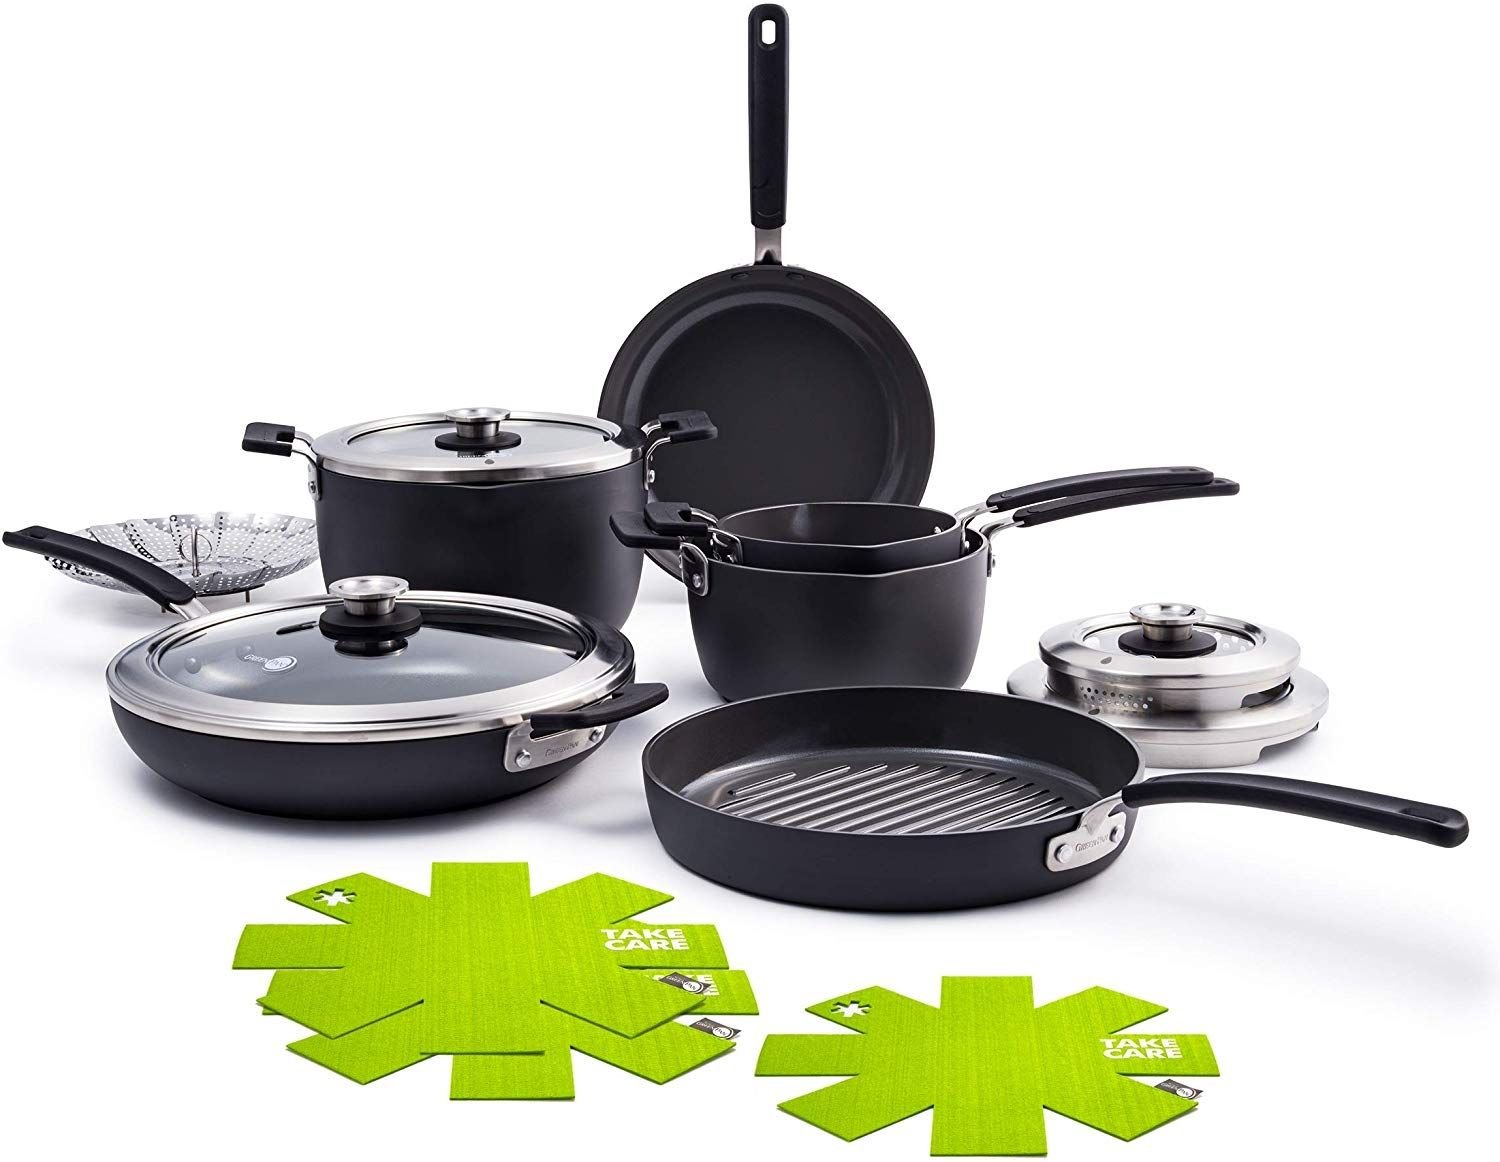 https://cdn.everythingkitchens.com/media/catalog/product/cache/70d878061ea71e5b62358b2b67547186/g/r/greenpan_levels_11-piece_ceramic_cookware_set_-_stackable_for_easy_storage.jpg